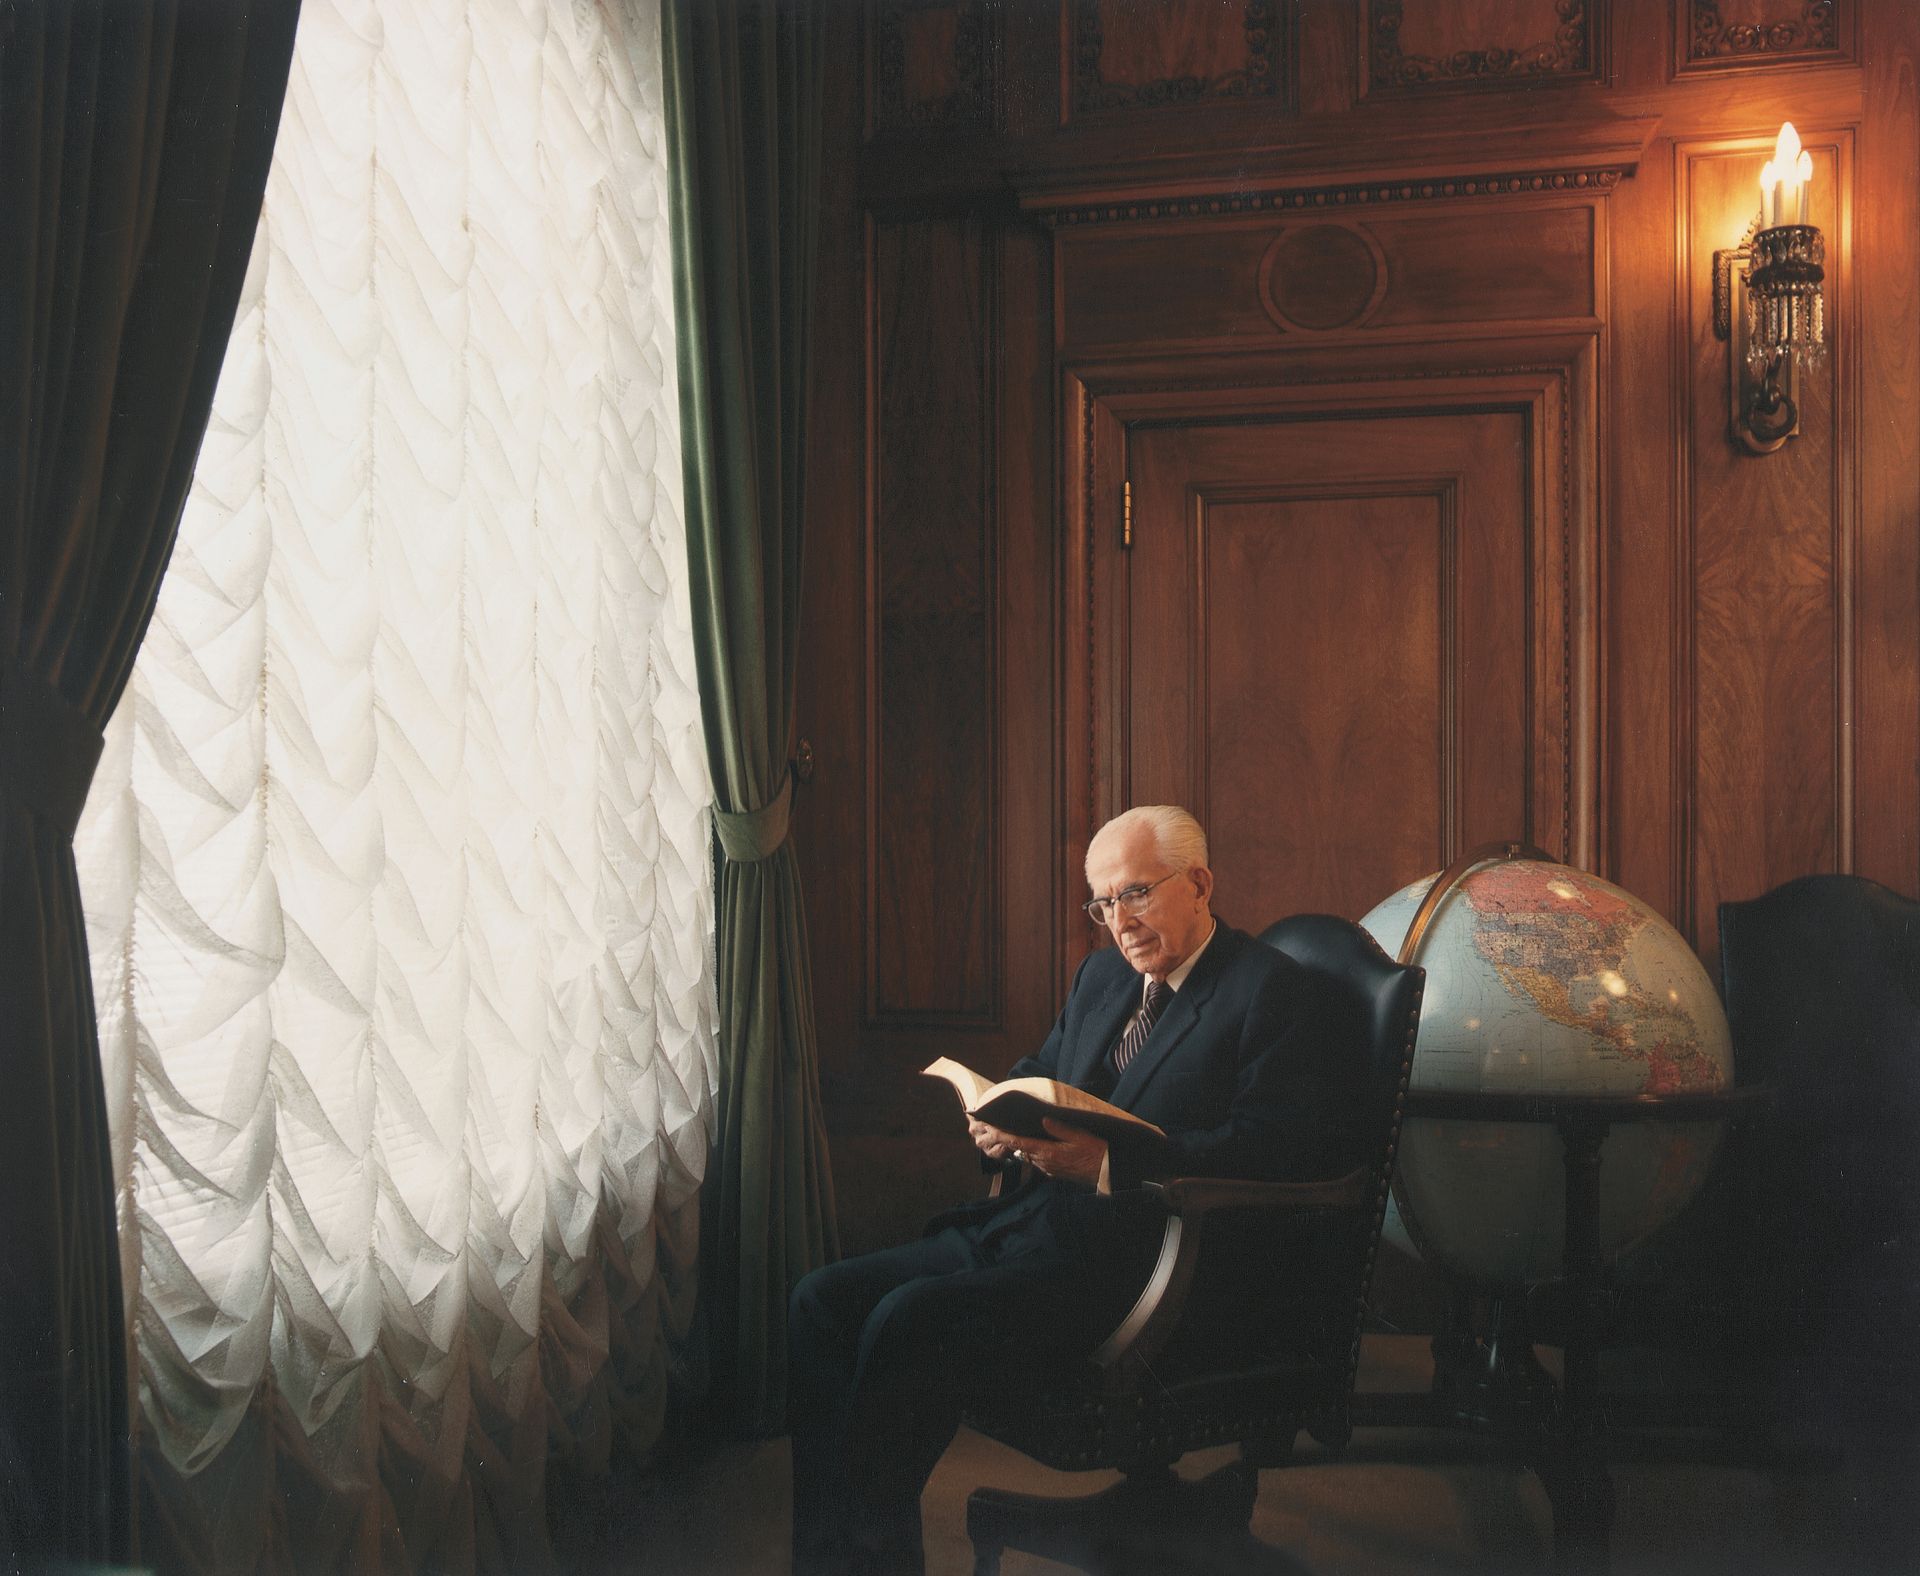 President Benson sitting and reading scriptures, with a large globe in the background.